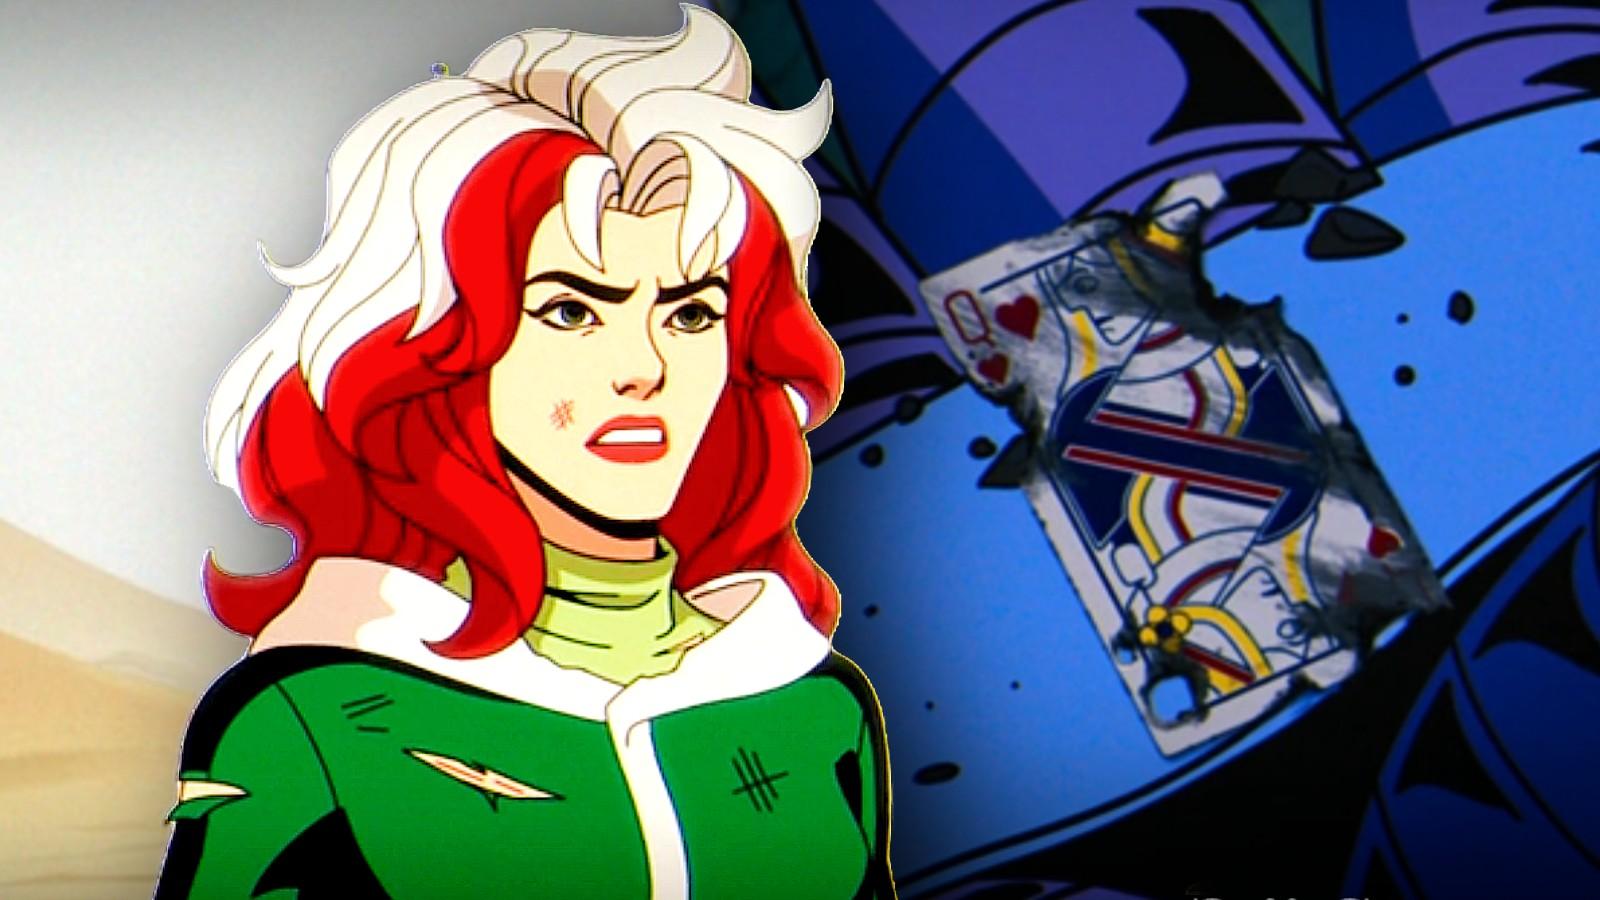 Rogue in X-Men '97 and Apocalypse holding Gambit's card in the post-credits scene